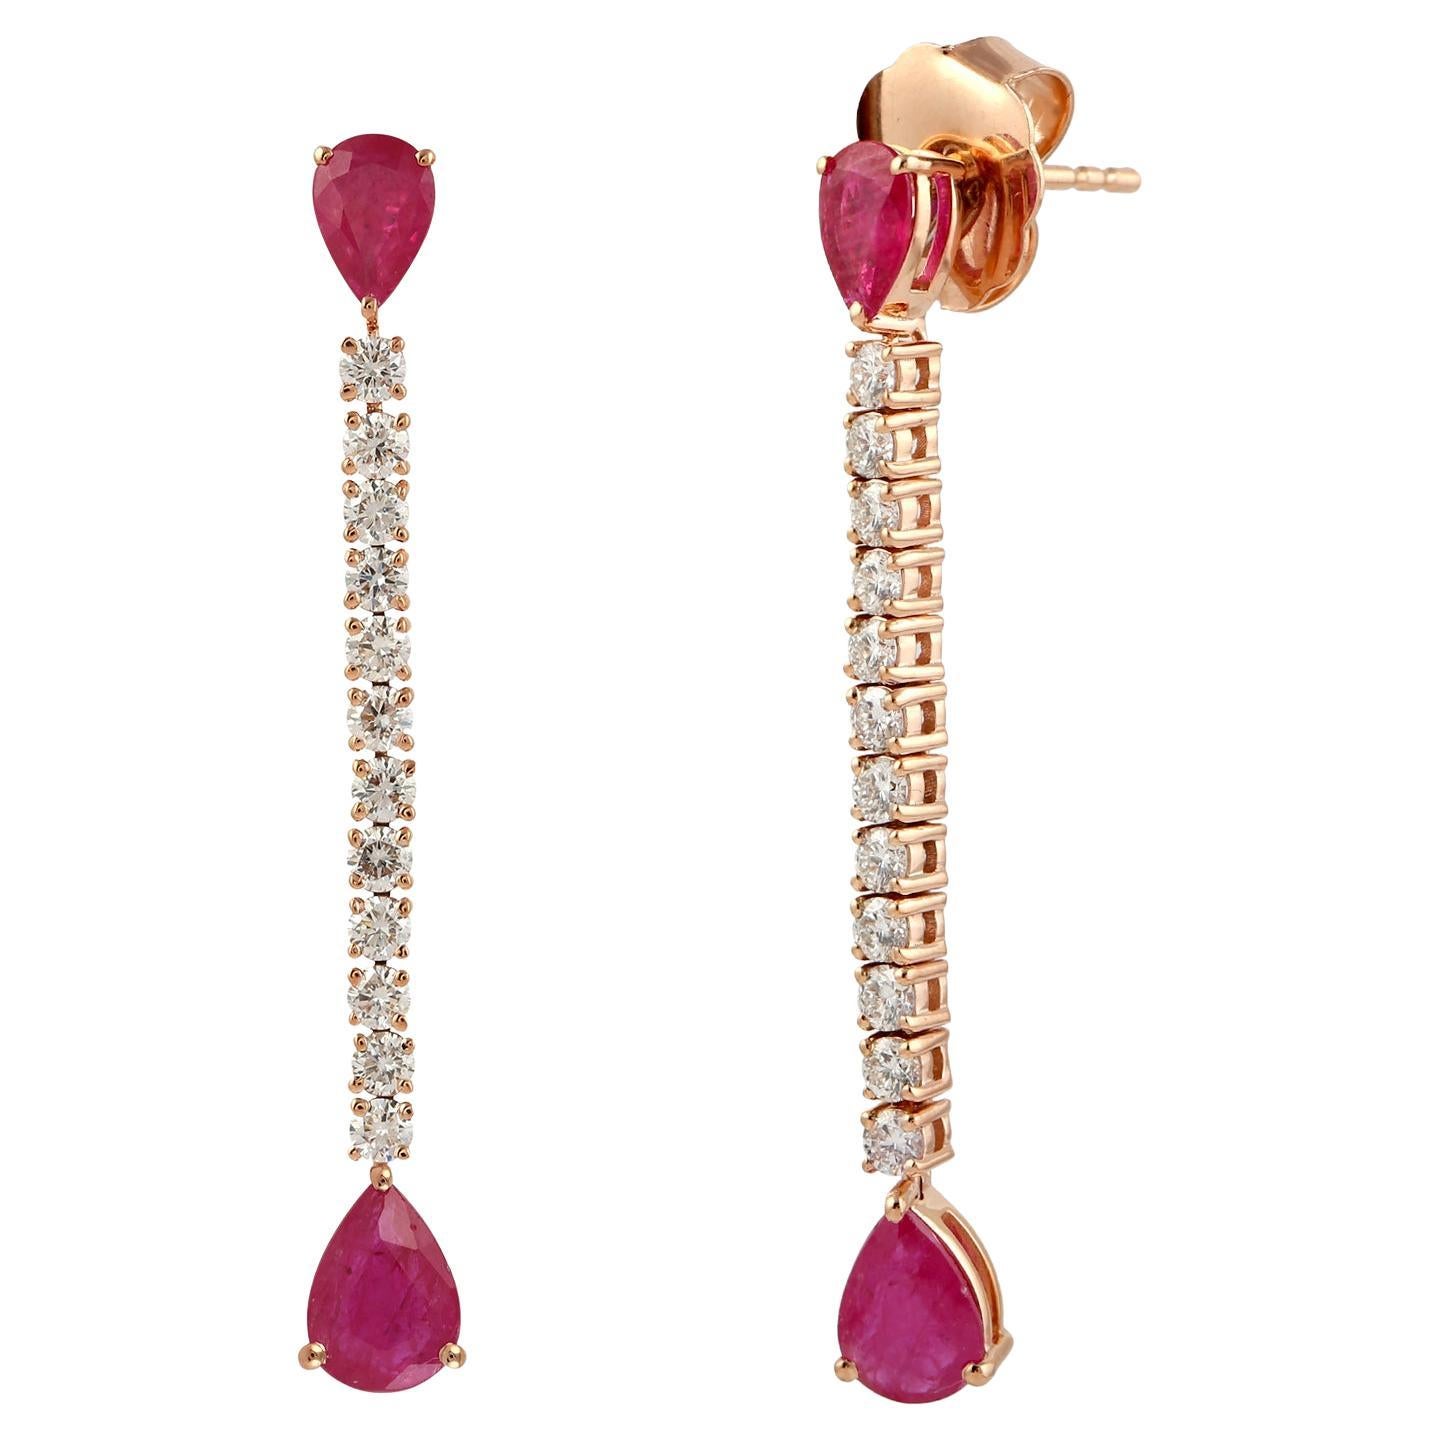 Pear Shaped Ruby Chain Earrings With Diamonds Made In 18k Gold For Sale